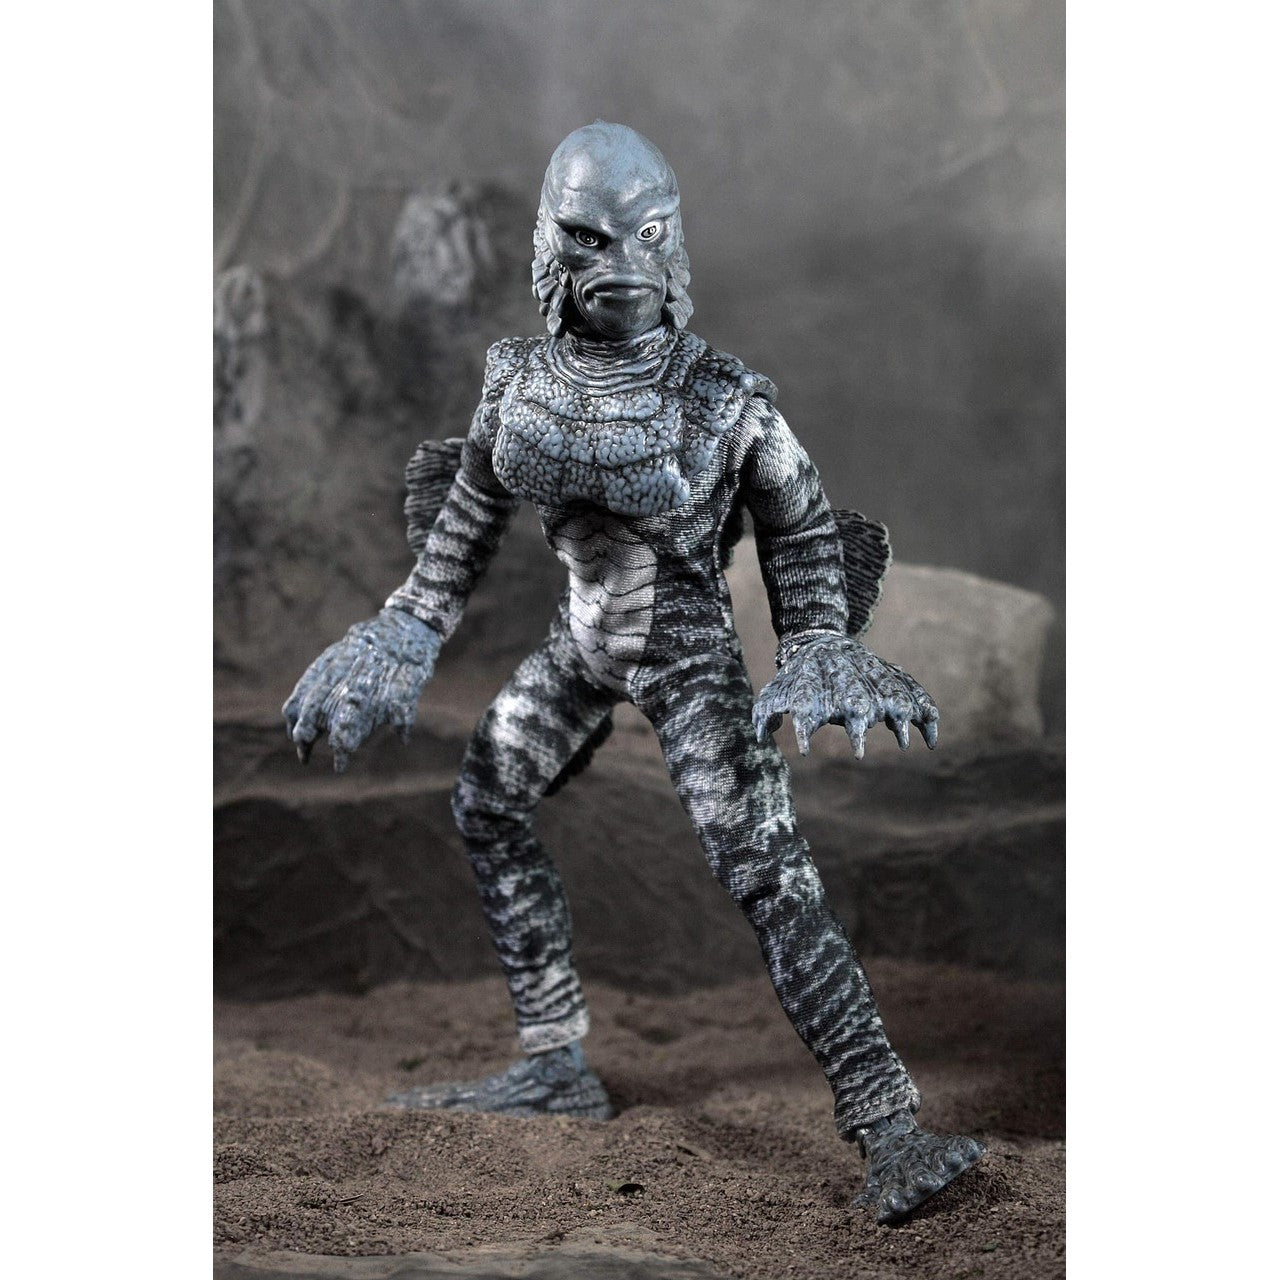 Creature from the Black Lagoon Black and White version 8" Action Figure - Mego